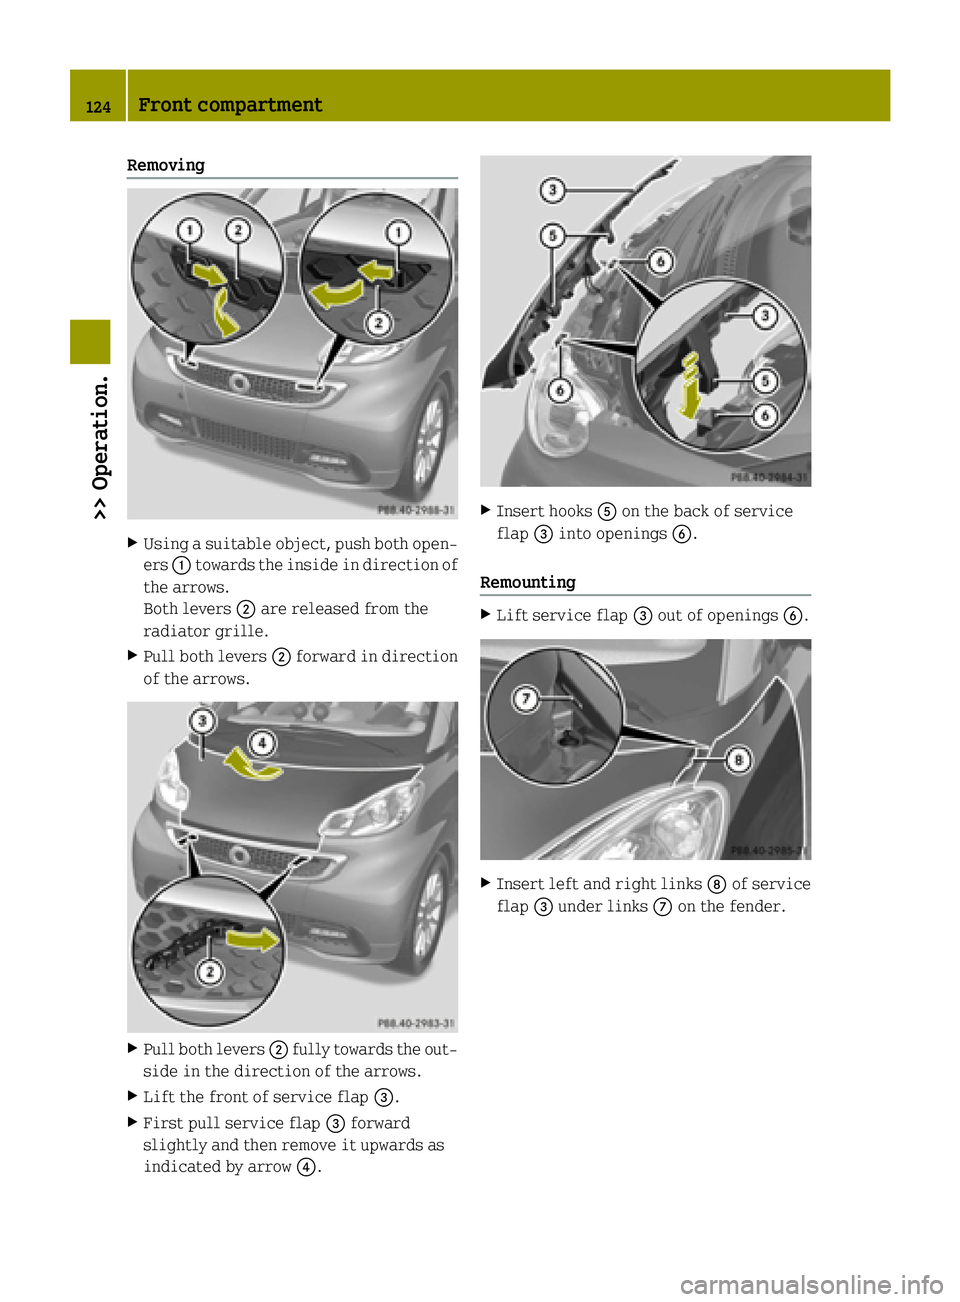 SMART FORTWO COUPE ELECTRIC DRIVE 2015 User Guide Removing
X
Using a suitable object, push both open-
ers :towards the inside in direction of
the arrows.
Both levers ;are released from the
radiator grille.
X Pull both levers ;forward in direction
of 